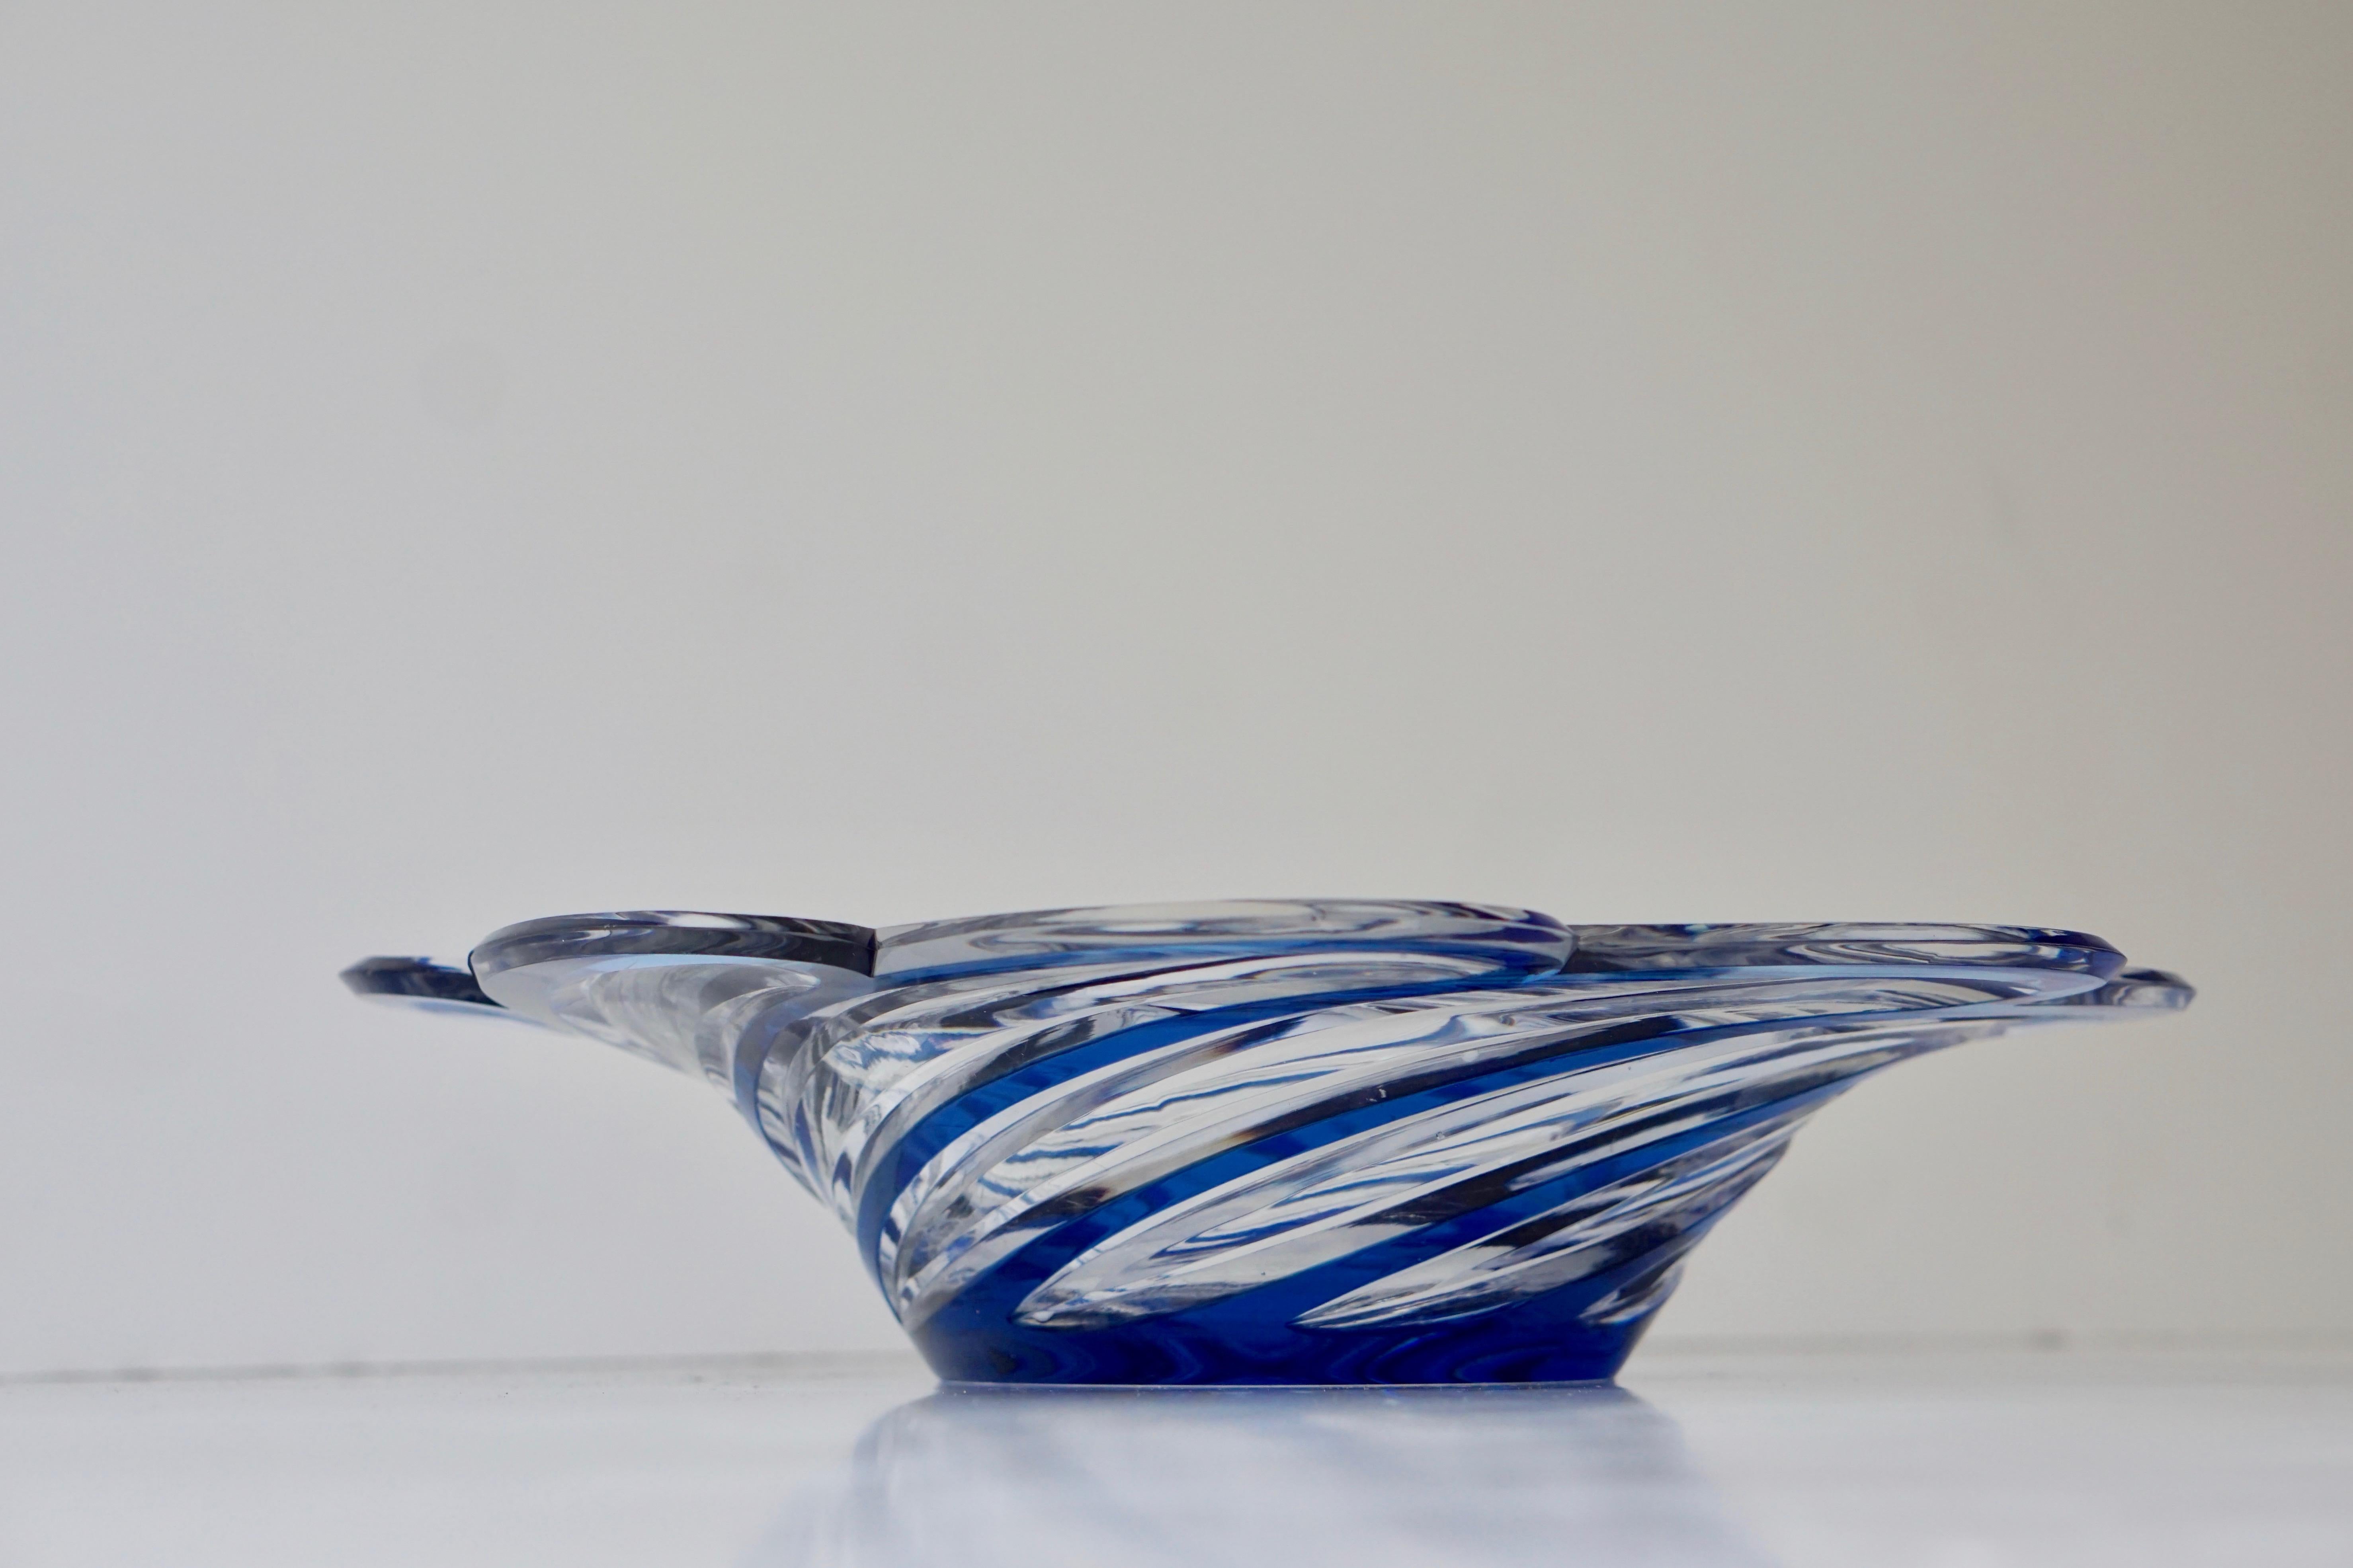 Italian Faceted Crystal Bowl with Sapphire Blue Color, 20th Century